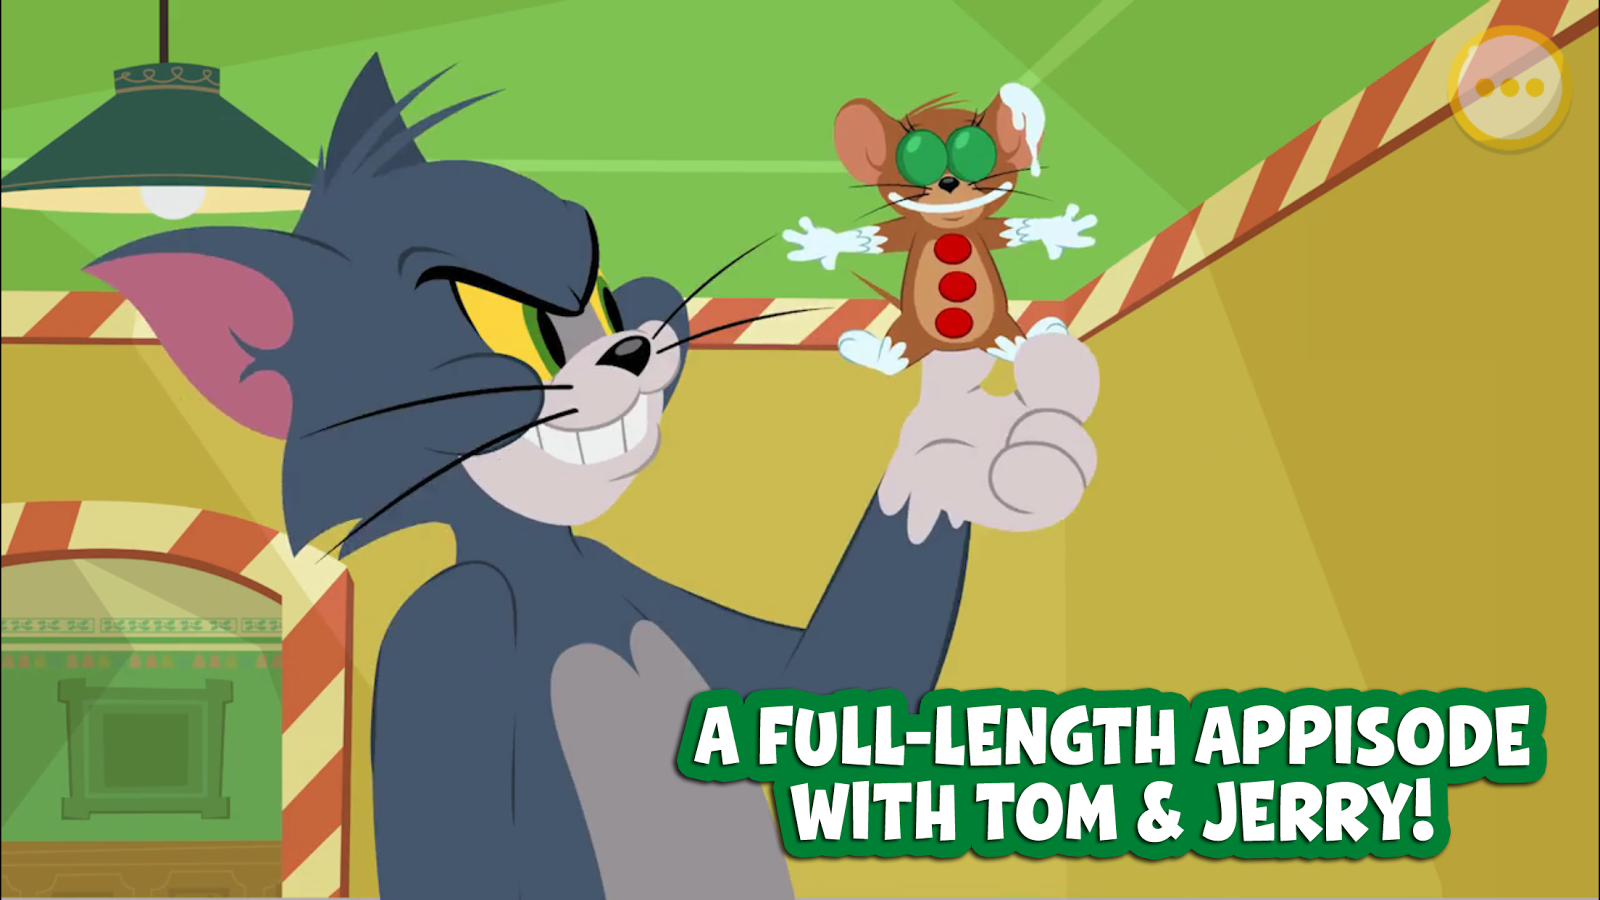 Tom-&-Jerry-Christmas-Appisode